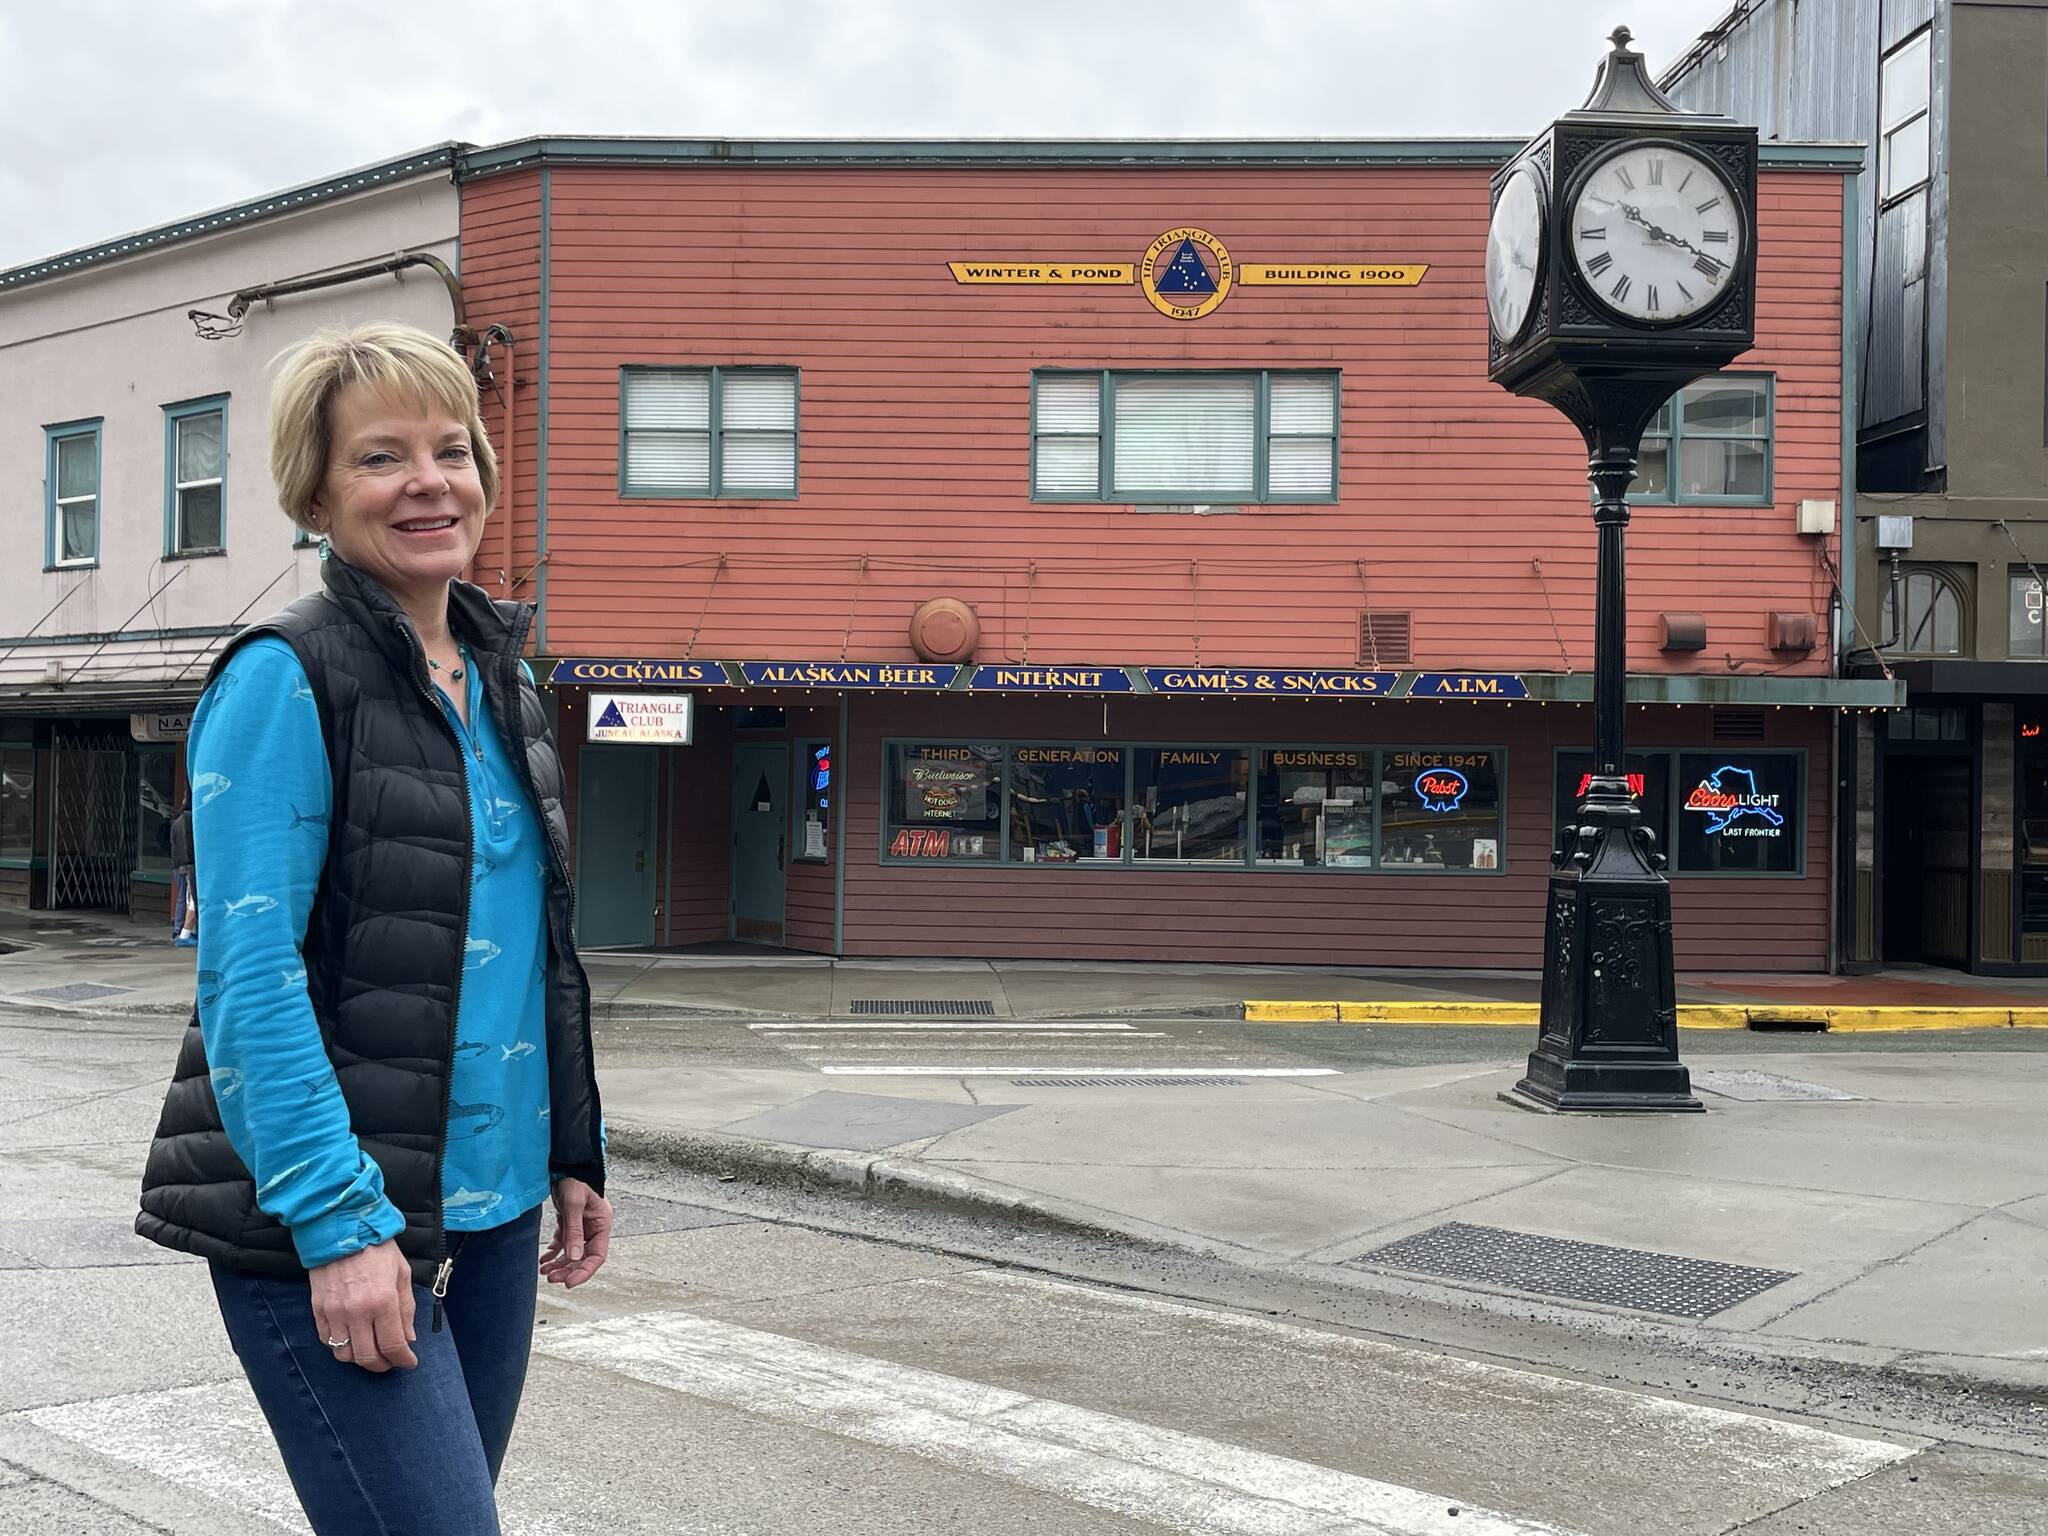 Leeann Thomas, third-generation owner of the Triangle Club, stands before the business her grandfather started in 1947. The location has a long history of Juneau businesses. (Laurie Craig / For the Downtown Business Association)